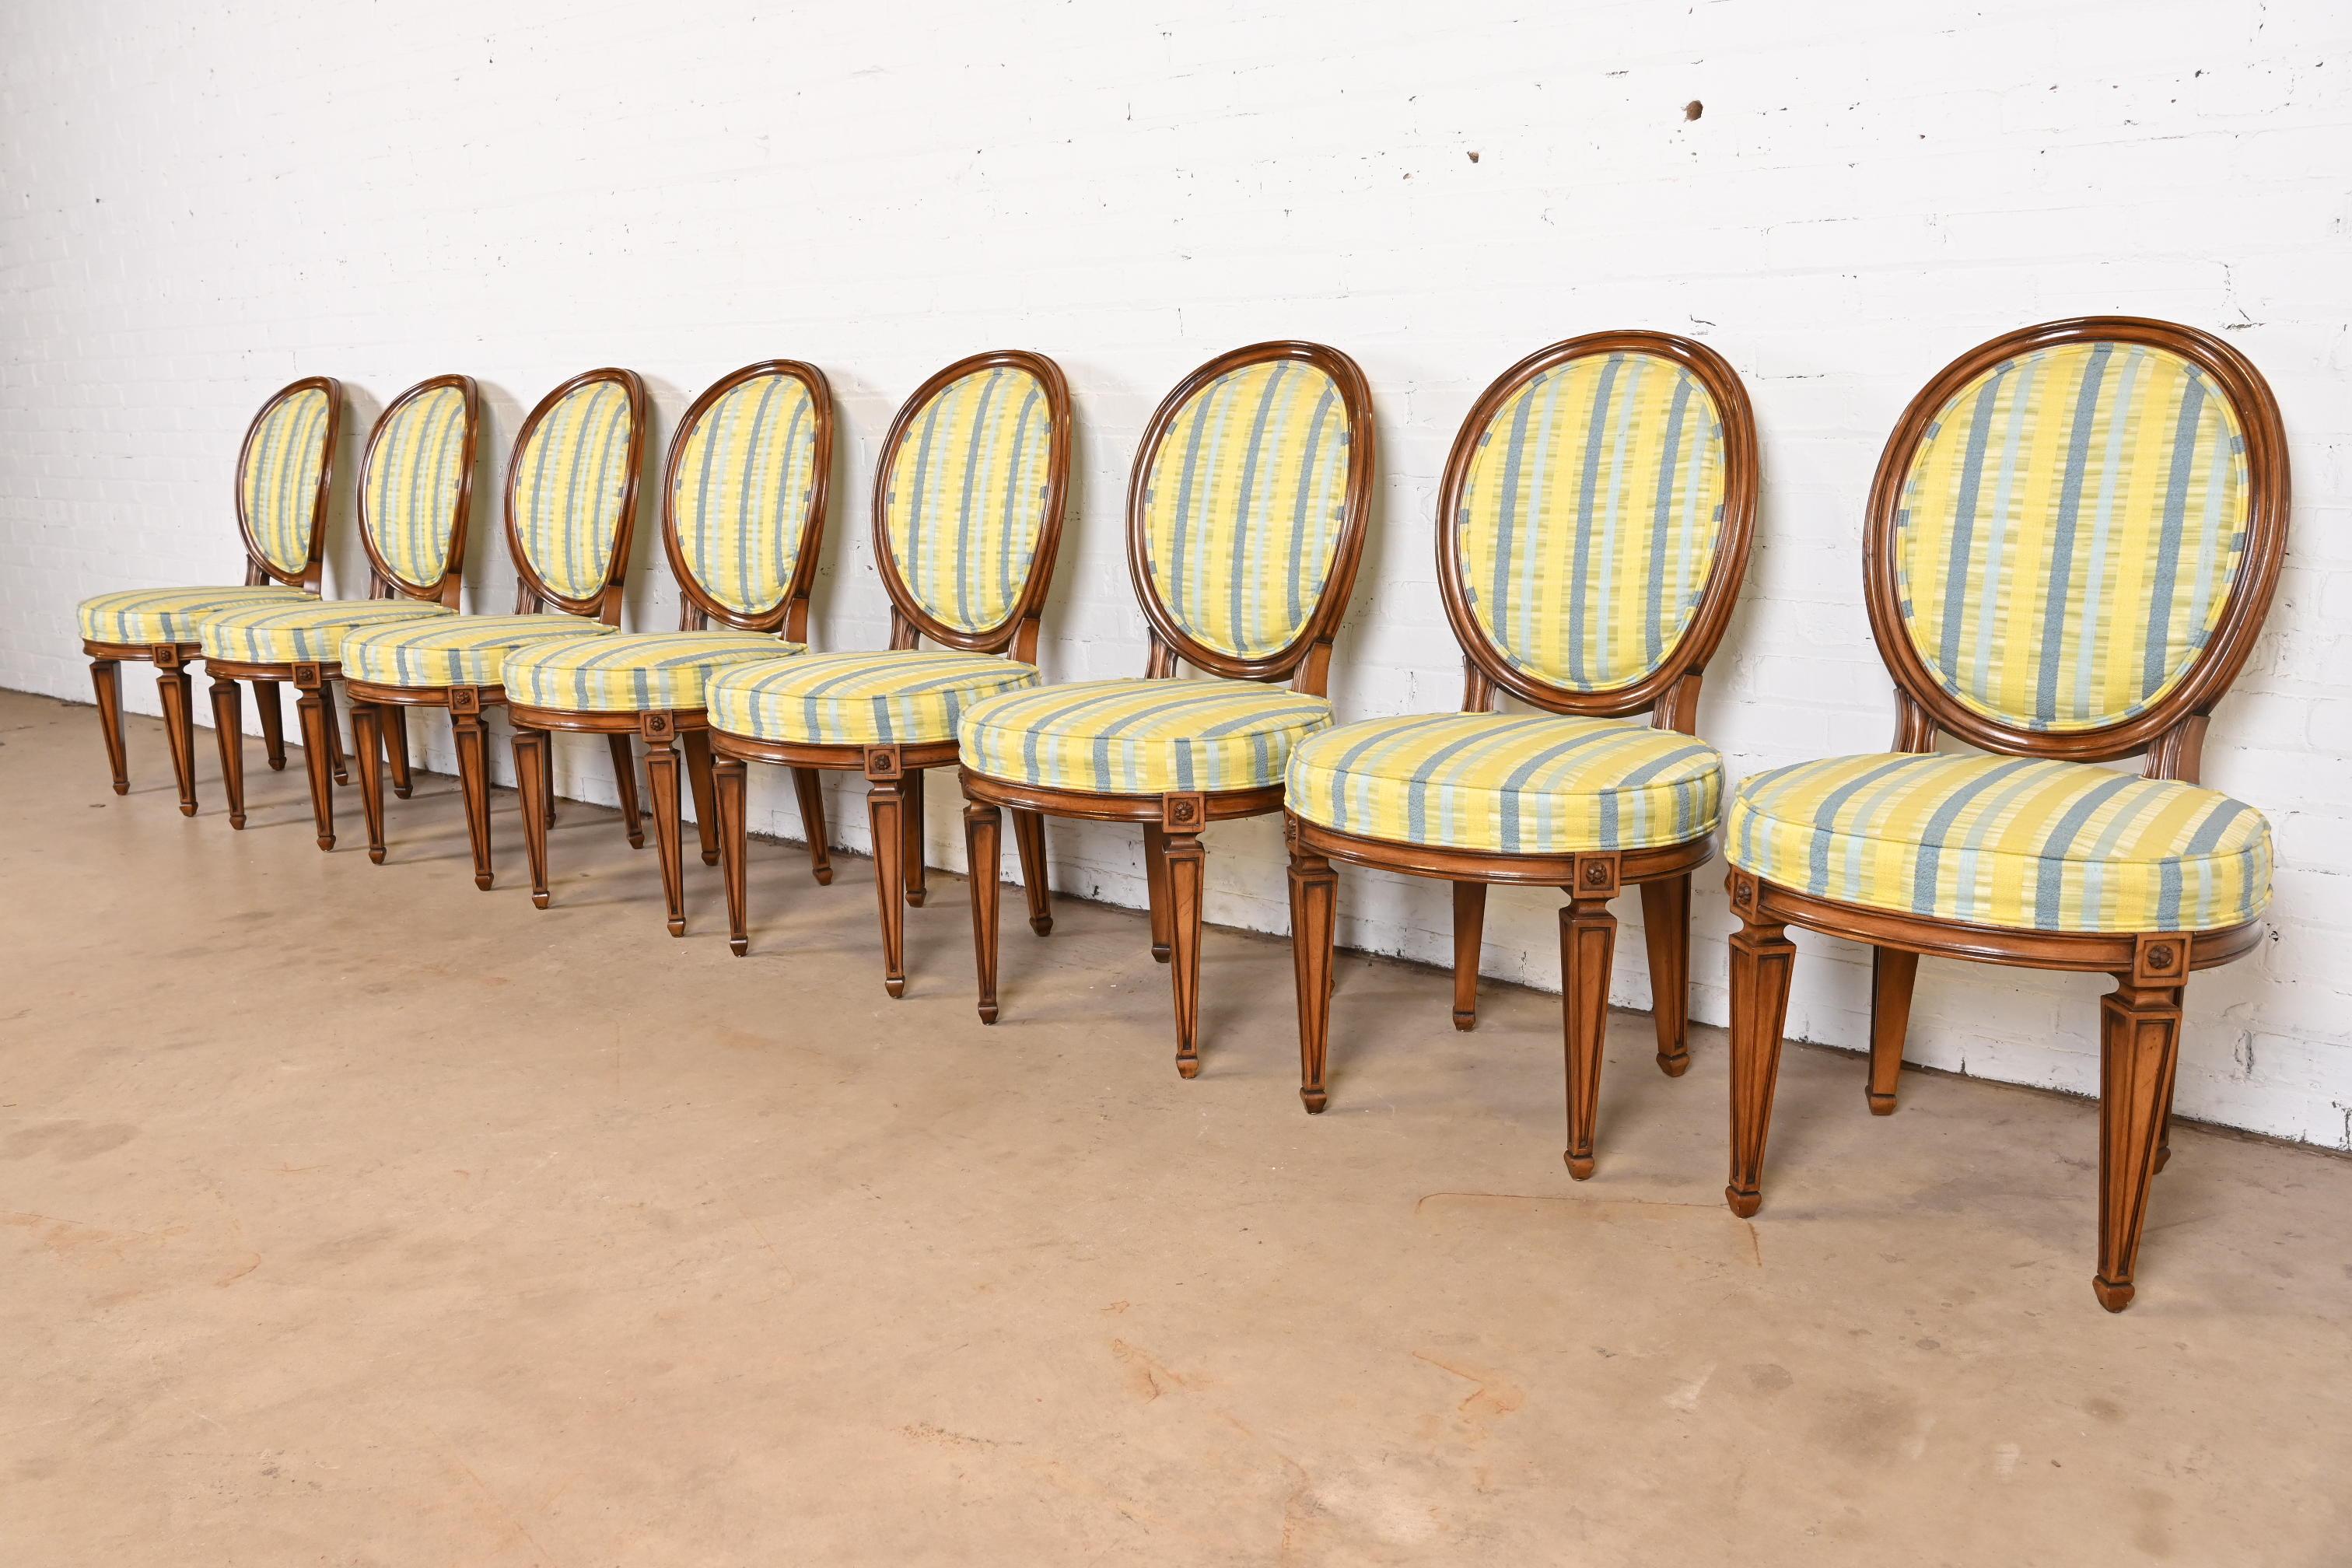 An outstanding set of eight French Regency Louis XVI style dining chairs

By Karges Furniture

USA, Circa 1980s

Gorgeous carved solid walnut frames, with blue and yellow striped upholstered seats and backs.

Measures: 21